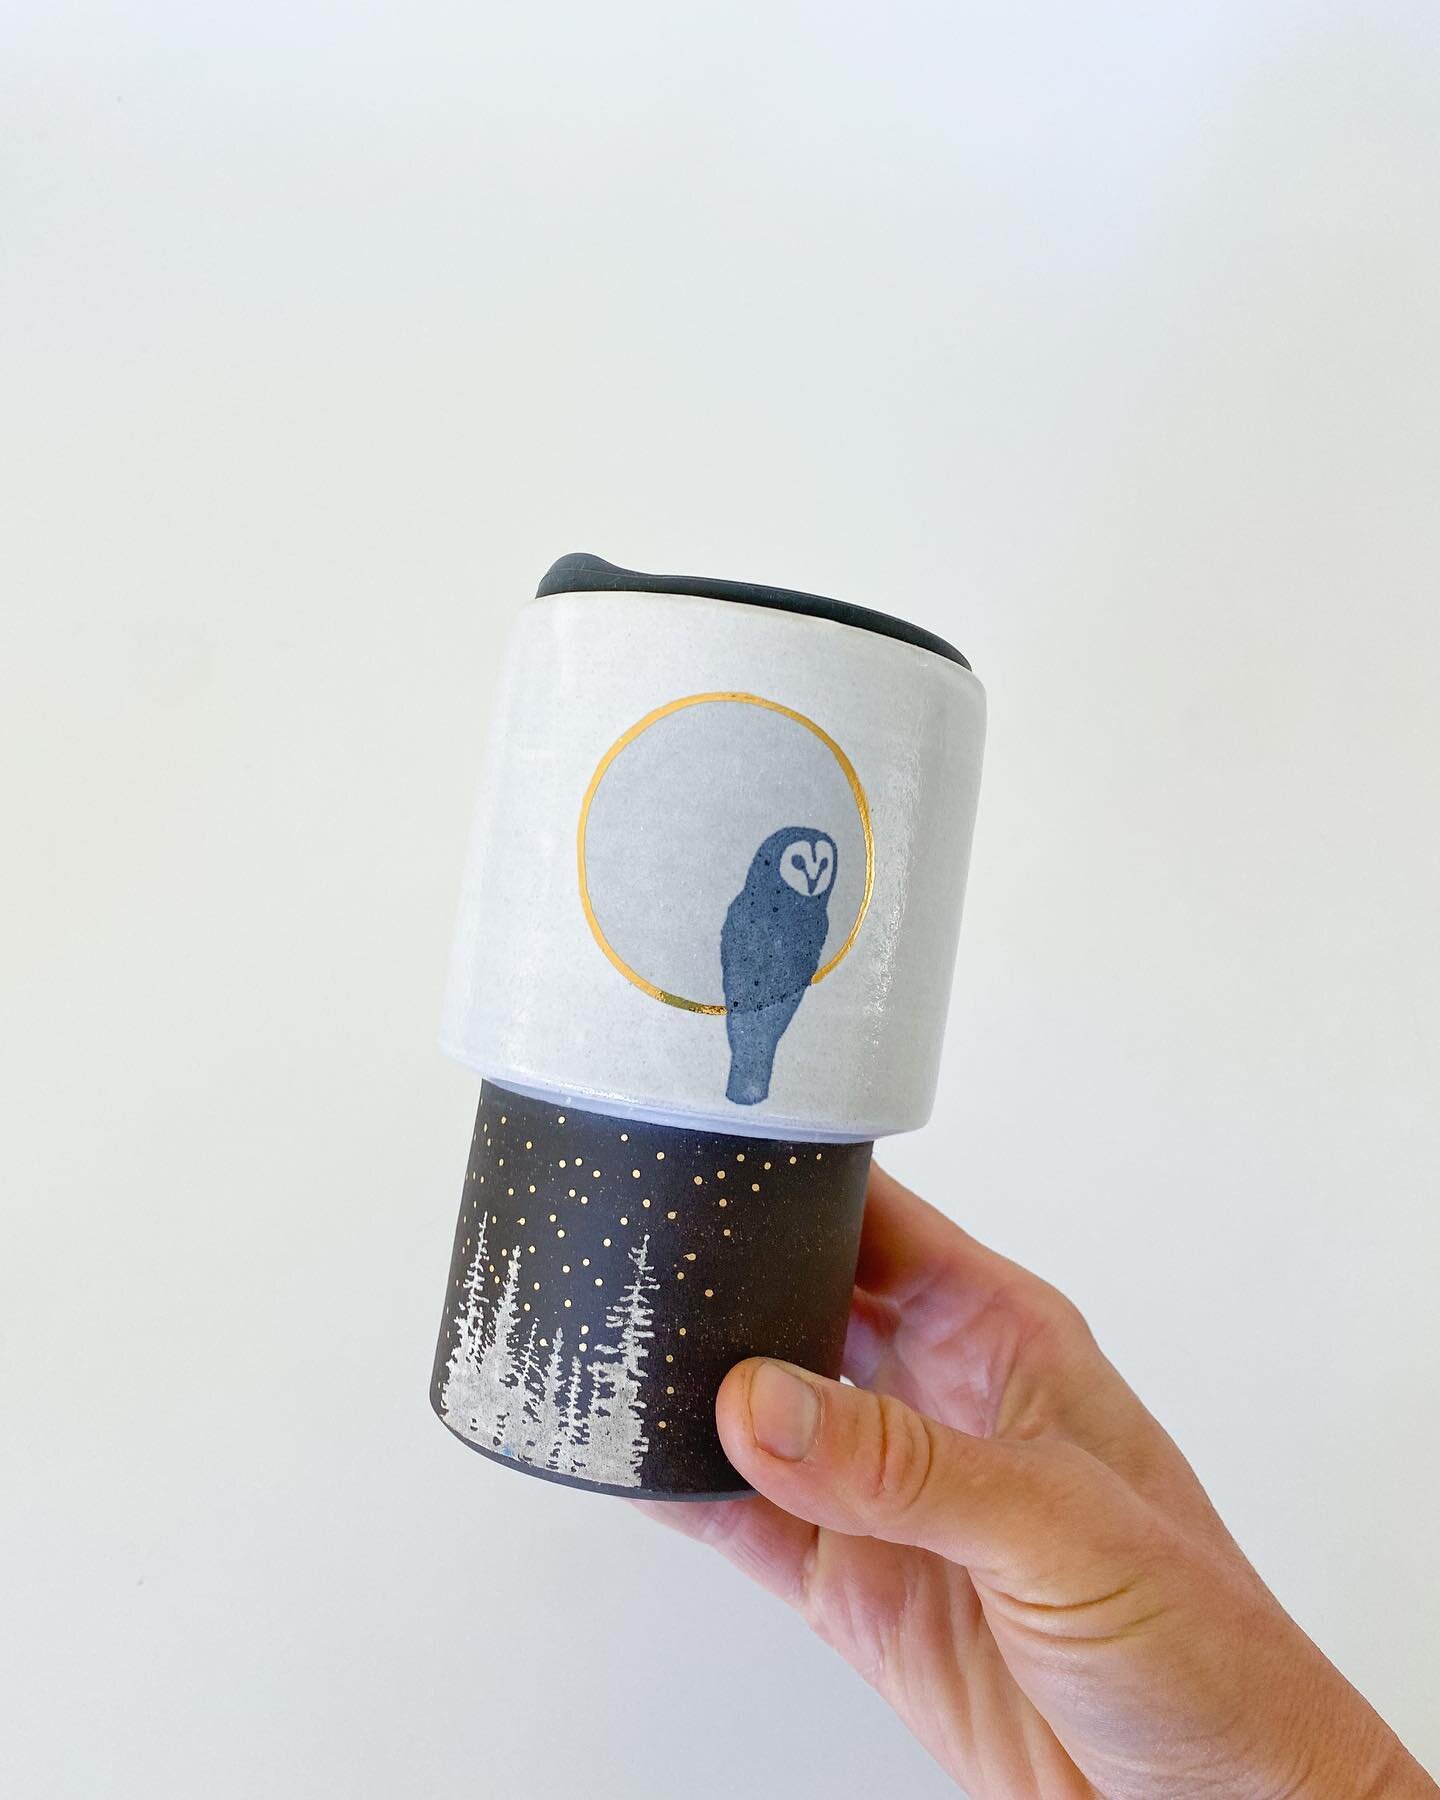 Member and ceramic artist Brooke Knippa of @apcuriosities will have some travel mugs, tea towels, and jewelry available at this year&rsquo;s holiday show! Featured here is the Barn Owl Travel Mug, Sunset Fringe Earrings, and Cardinal Tea Towel. 
.
.
